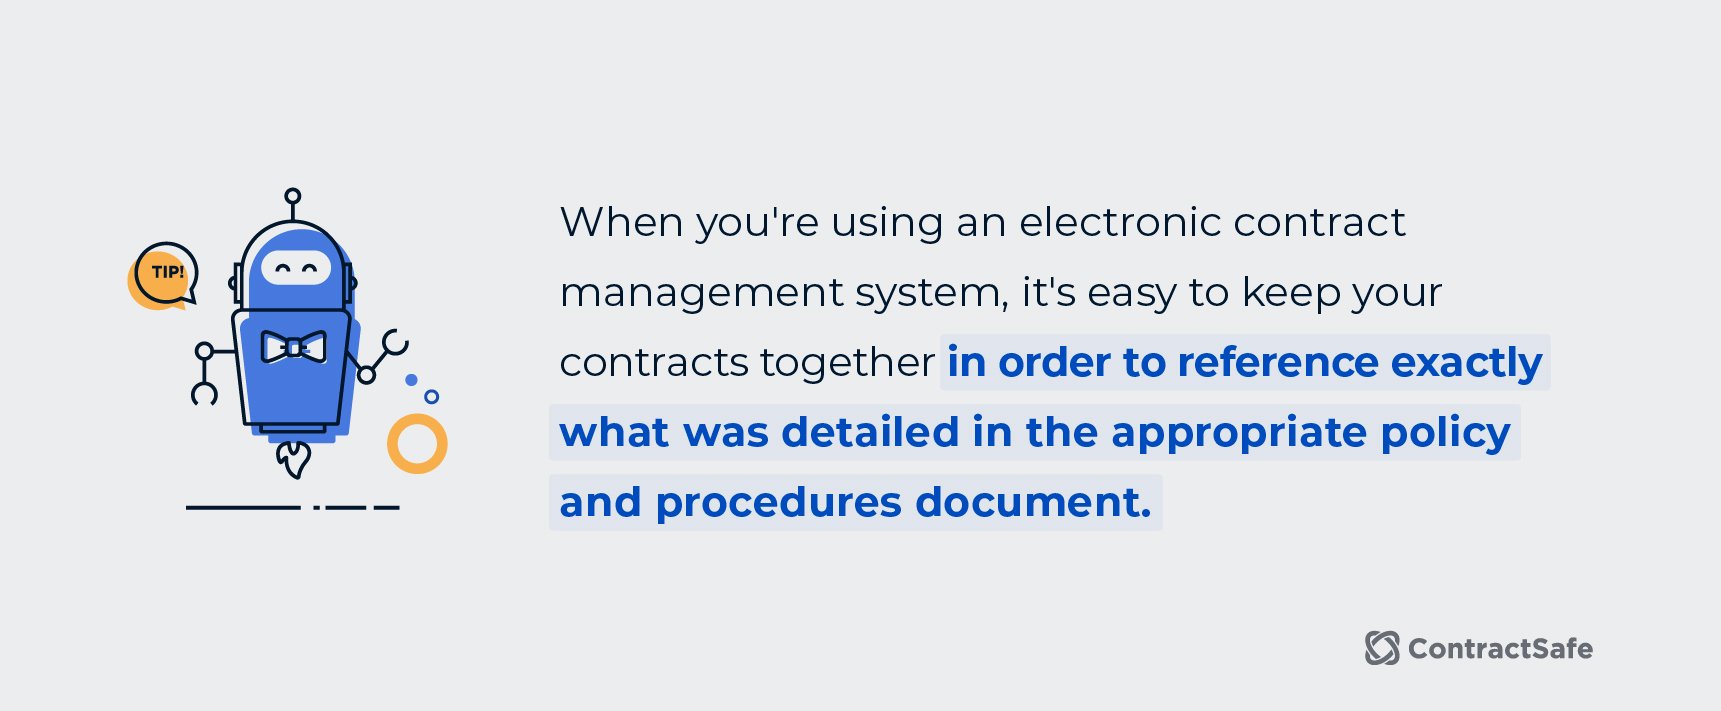 When you're using an electric contract management system, it's easy to keep your contracts together in order to reference exactly what was detailed in the appropriate policy and procedures document.